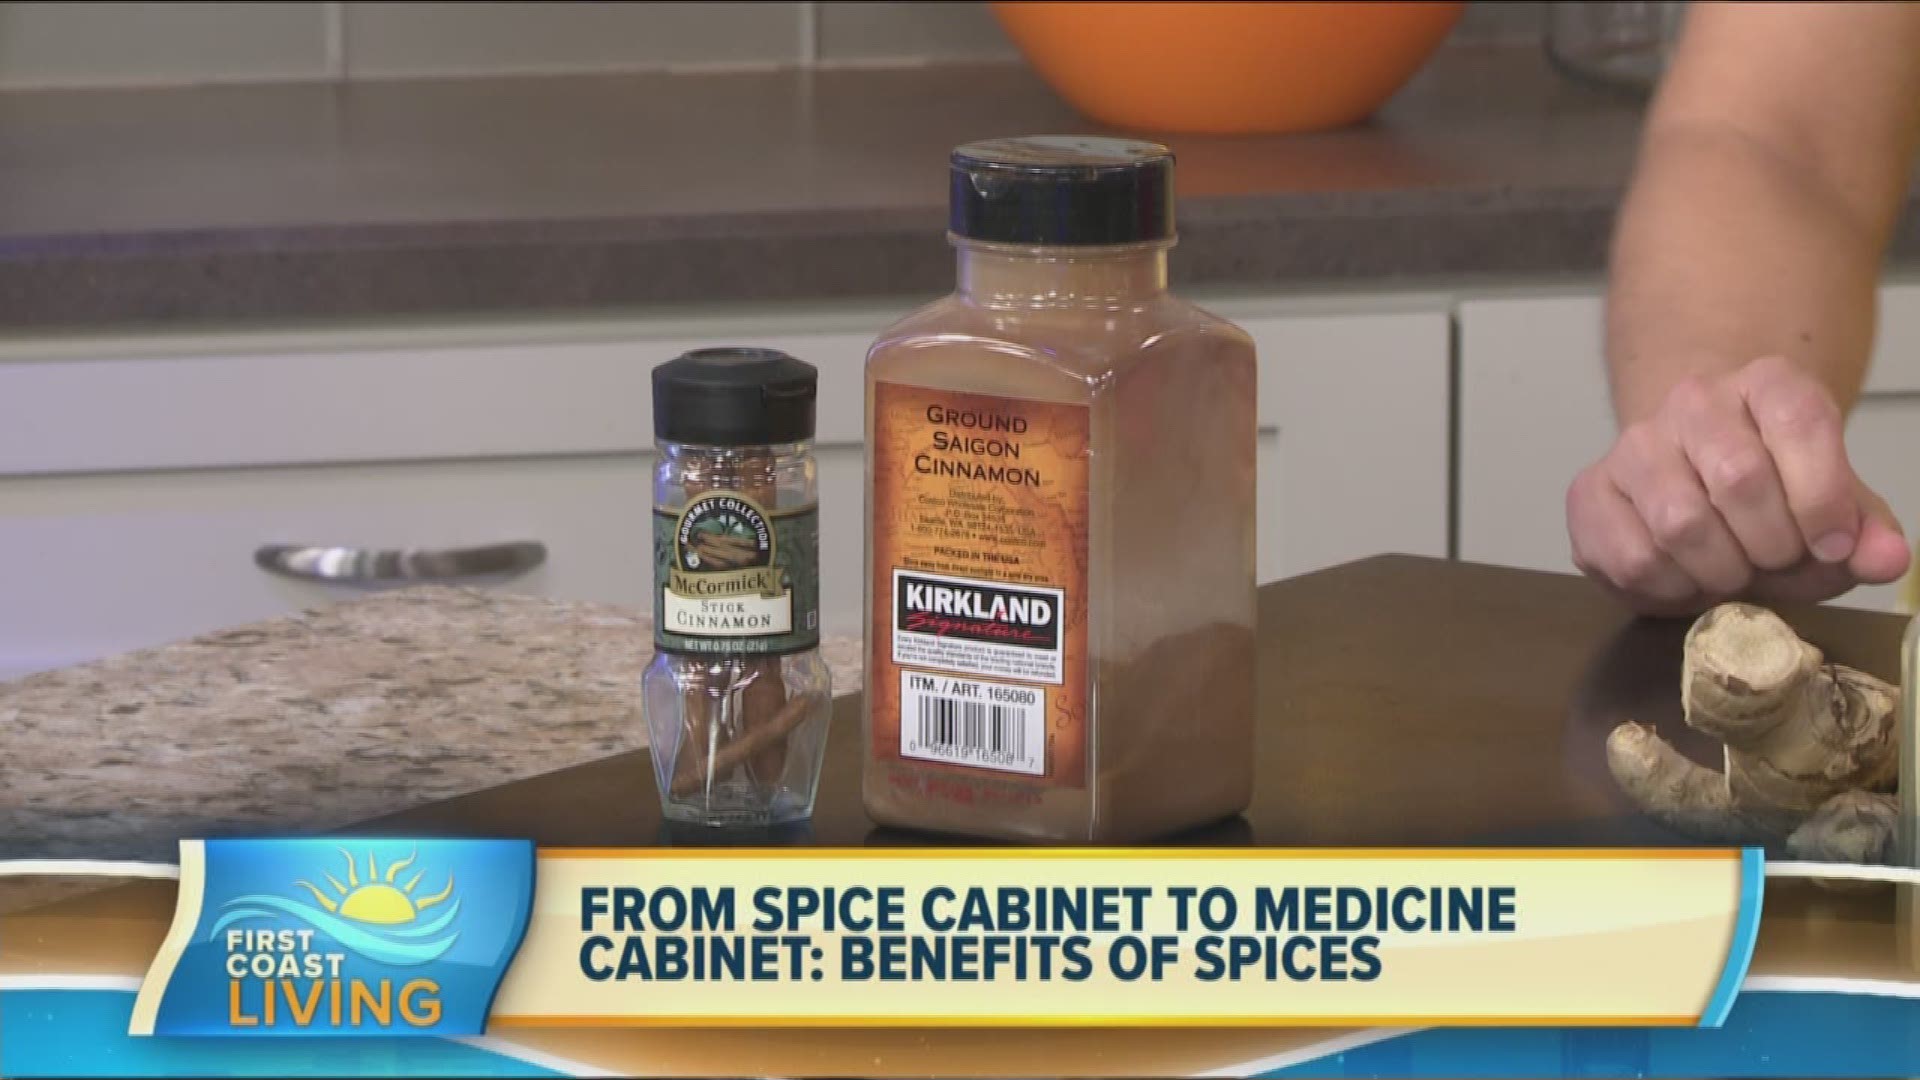 You probably have these spices in your cabinet right now!